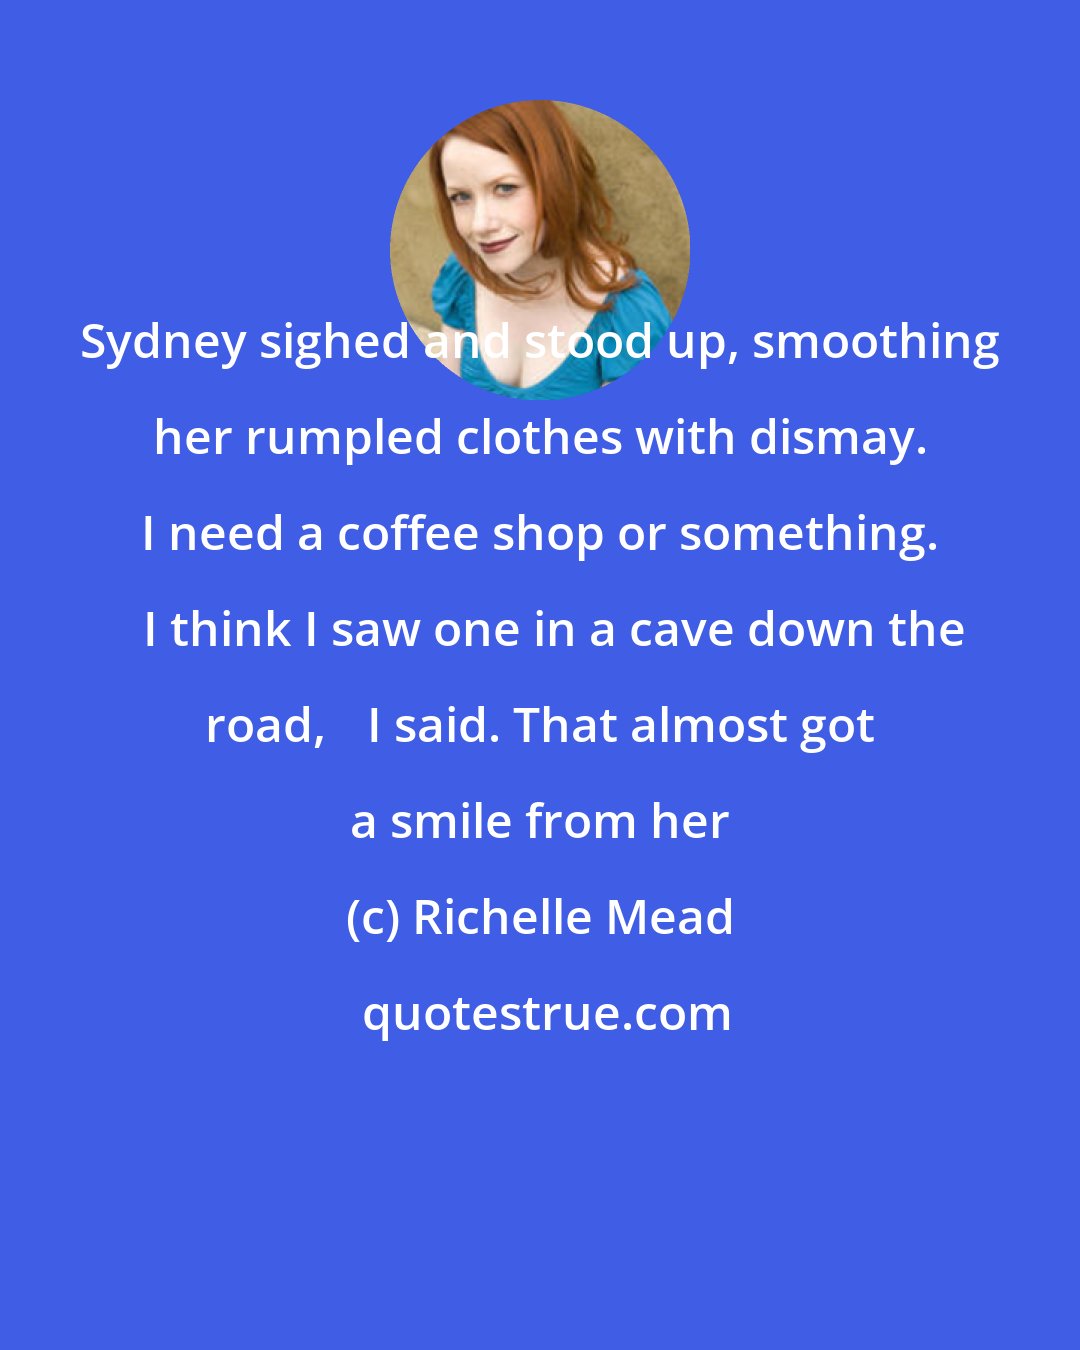 Richelle Mead: Sydney sighed and stood up, smoothing her rumpled clothes with dismay. ʺI need a coffee shop or something.ʺ ʺI think I saw one in a cave down the road,ʺ I said. That almost got a smile from her